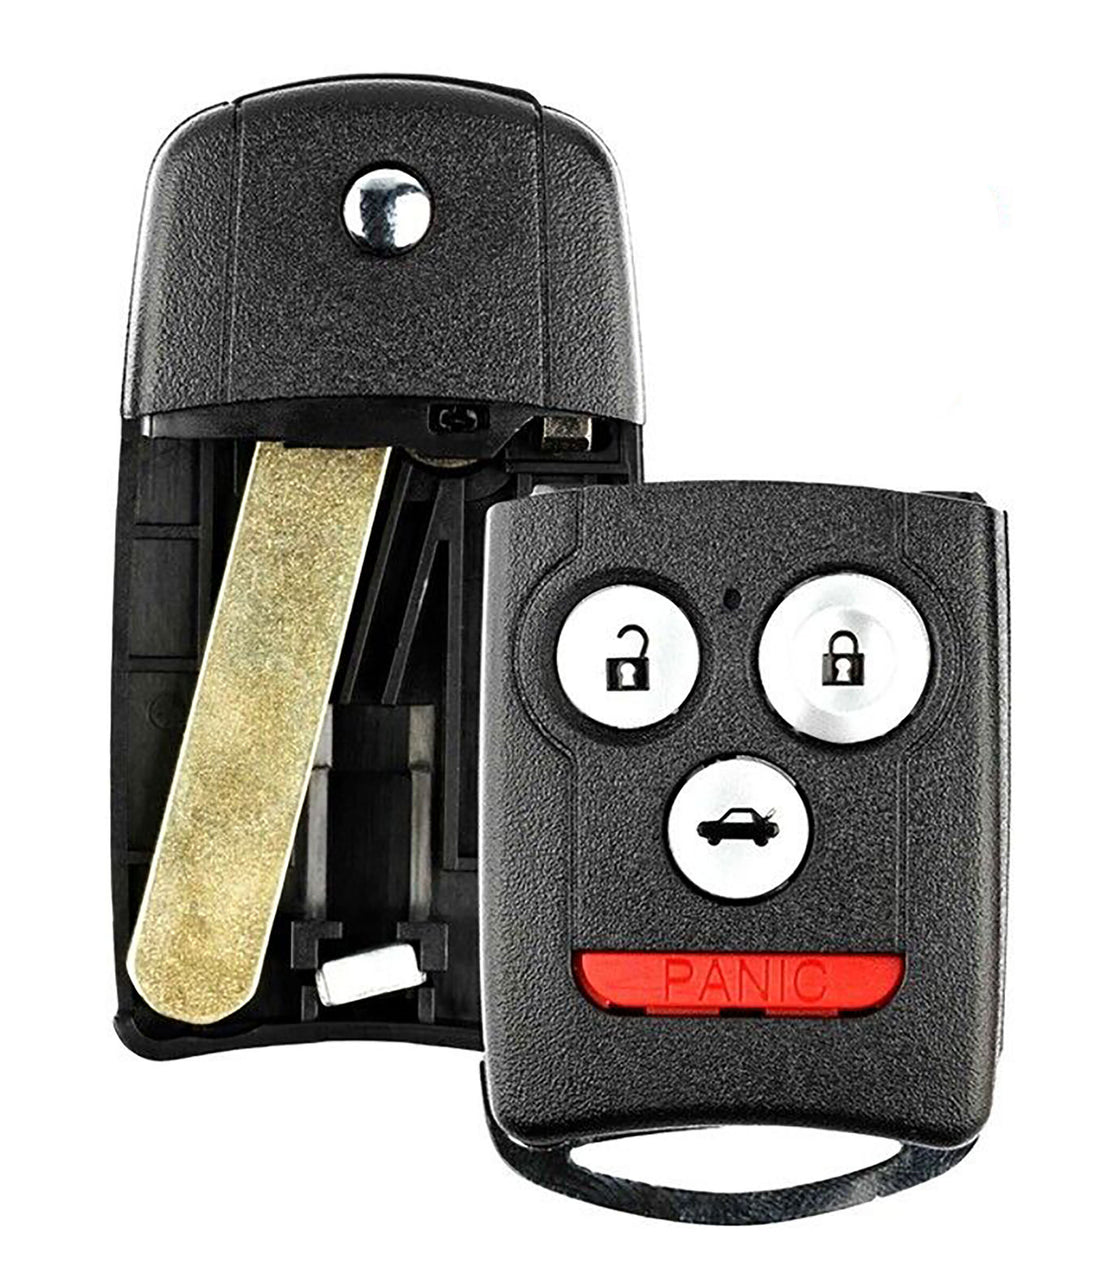 1x New Replacement Key Fob Remote SHELL / CASE Compatible with & Fit For Acura Vehicles - MPN N5F0602A1A-08 (NO electronics or Chip inside)